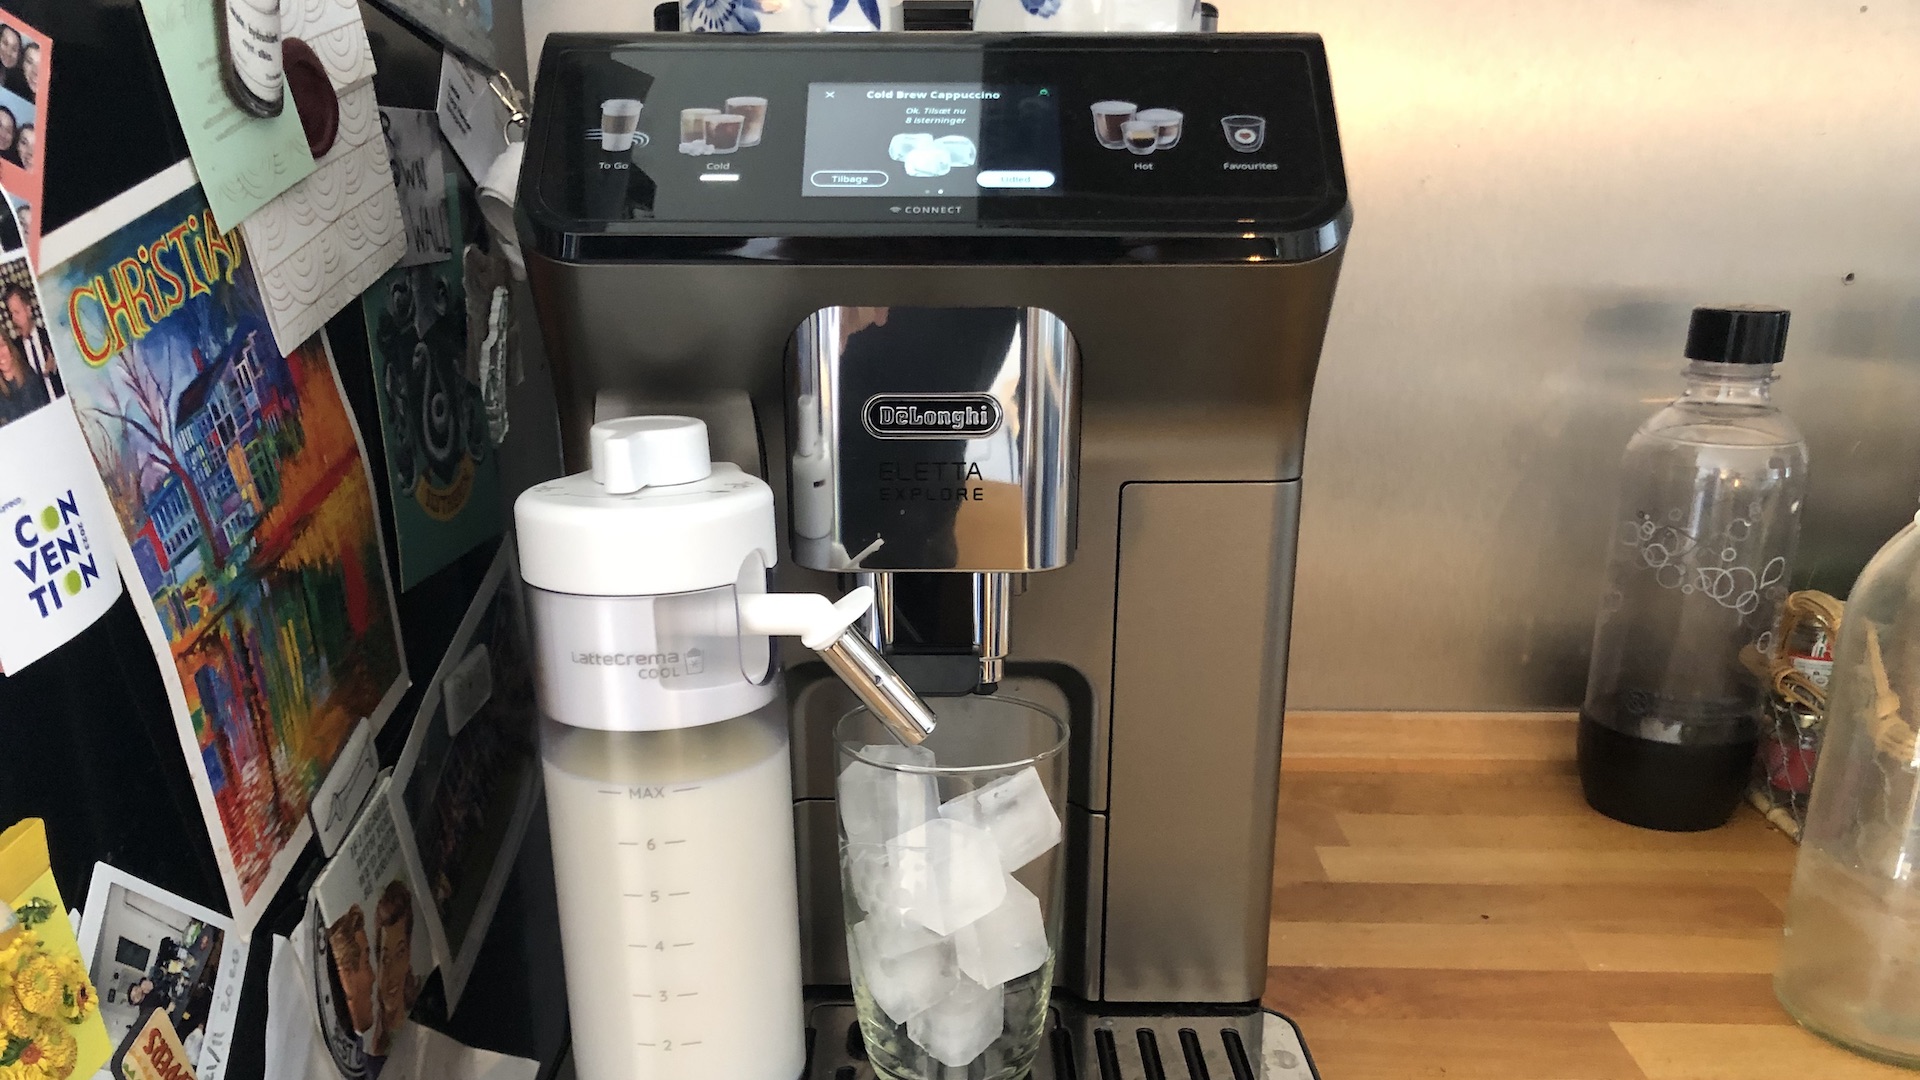 De'Longhi's Eletta Explore Review 2022: Price and Where to Buy